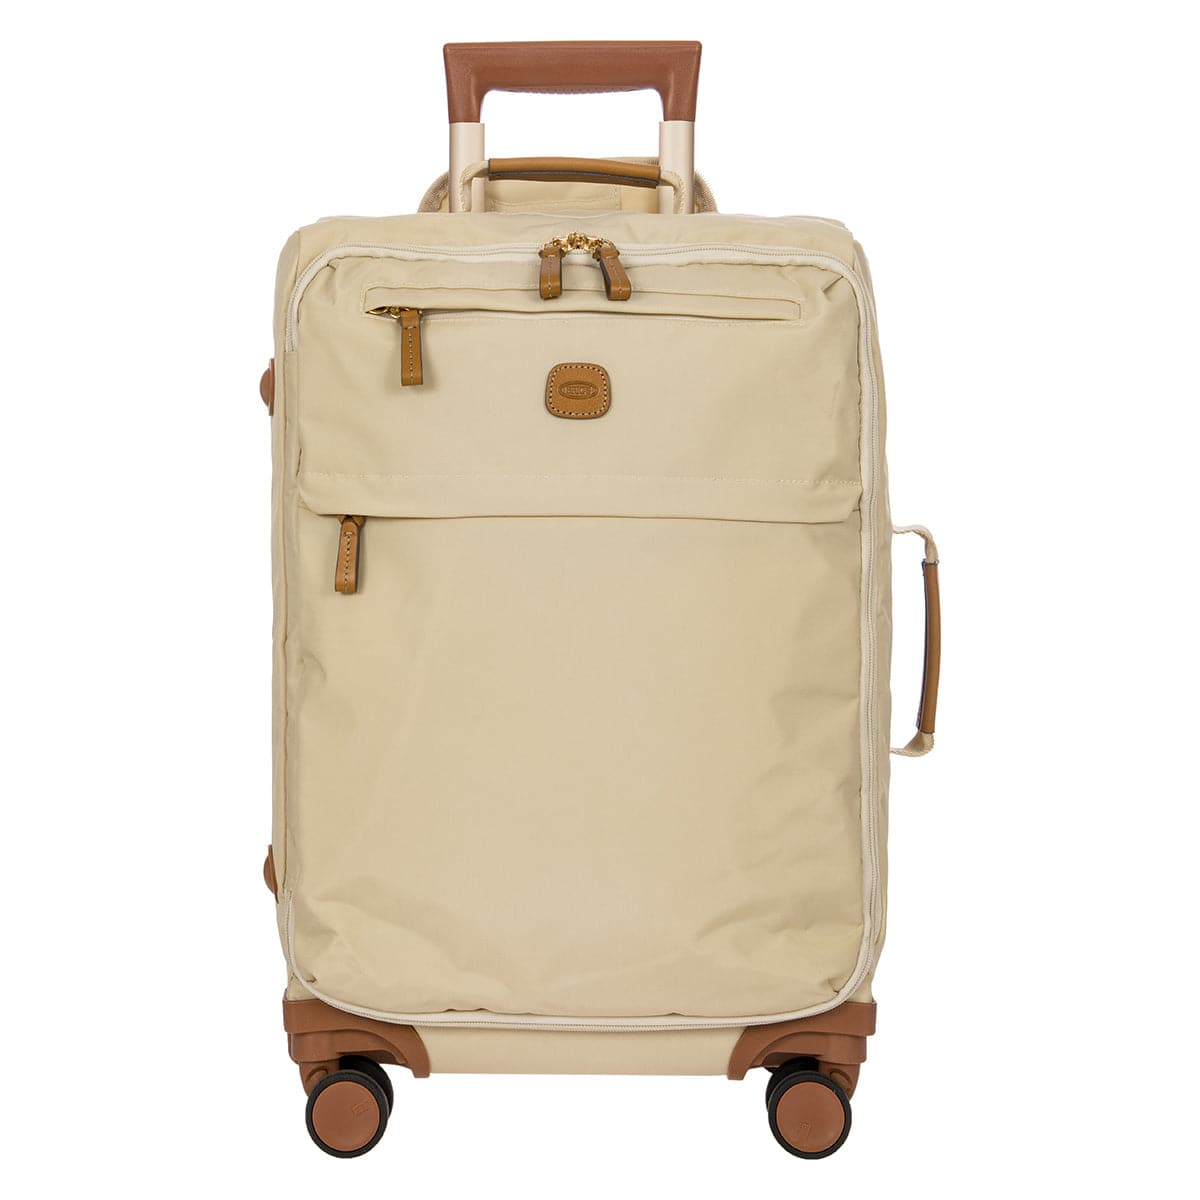 Bric's X-Bag/X-Travel New 21" Carry-On Spinner with Frame Luggage